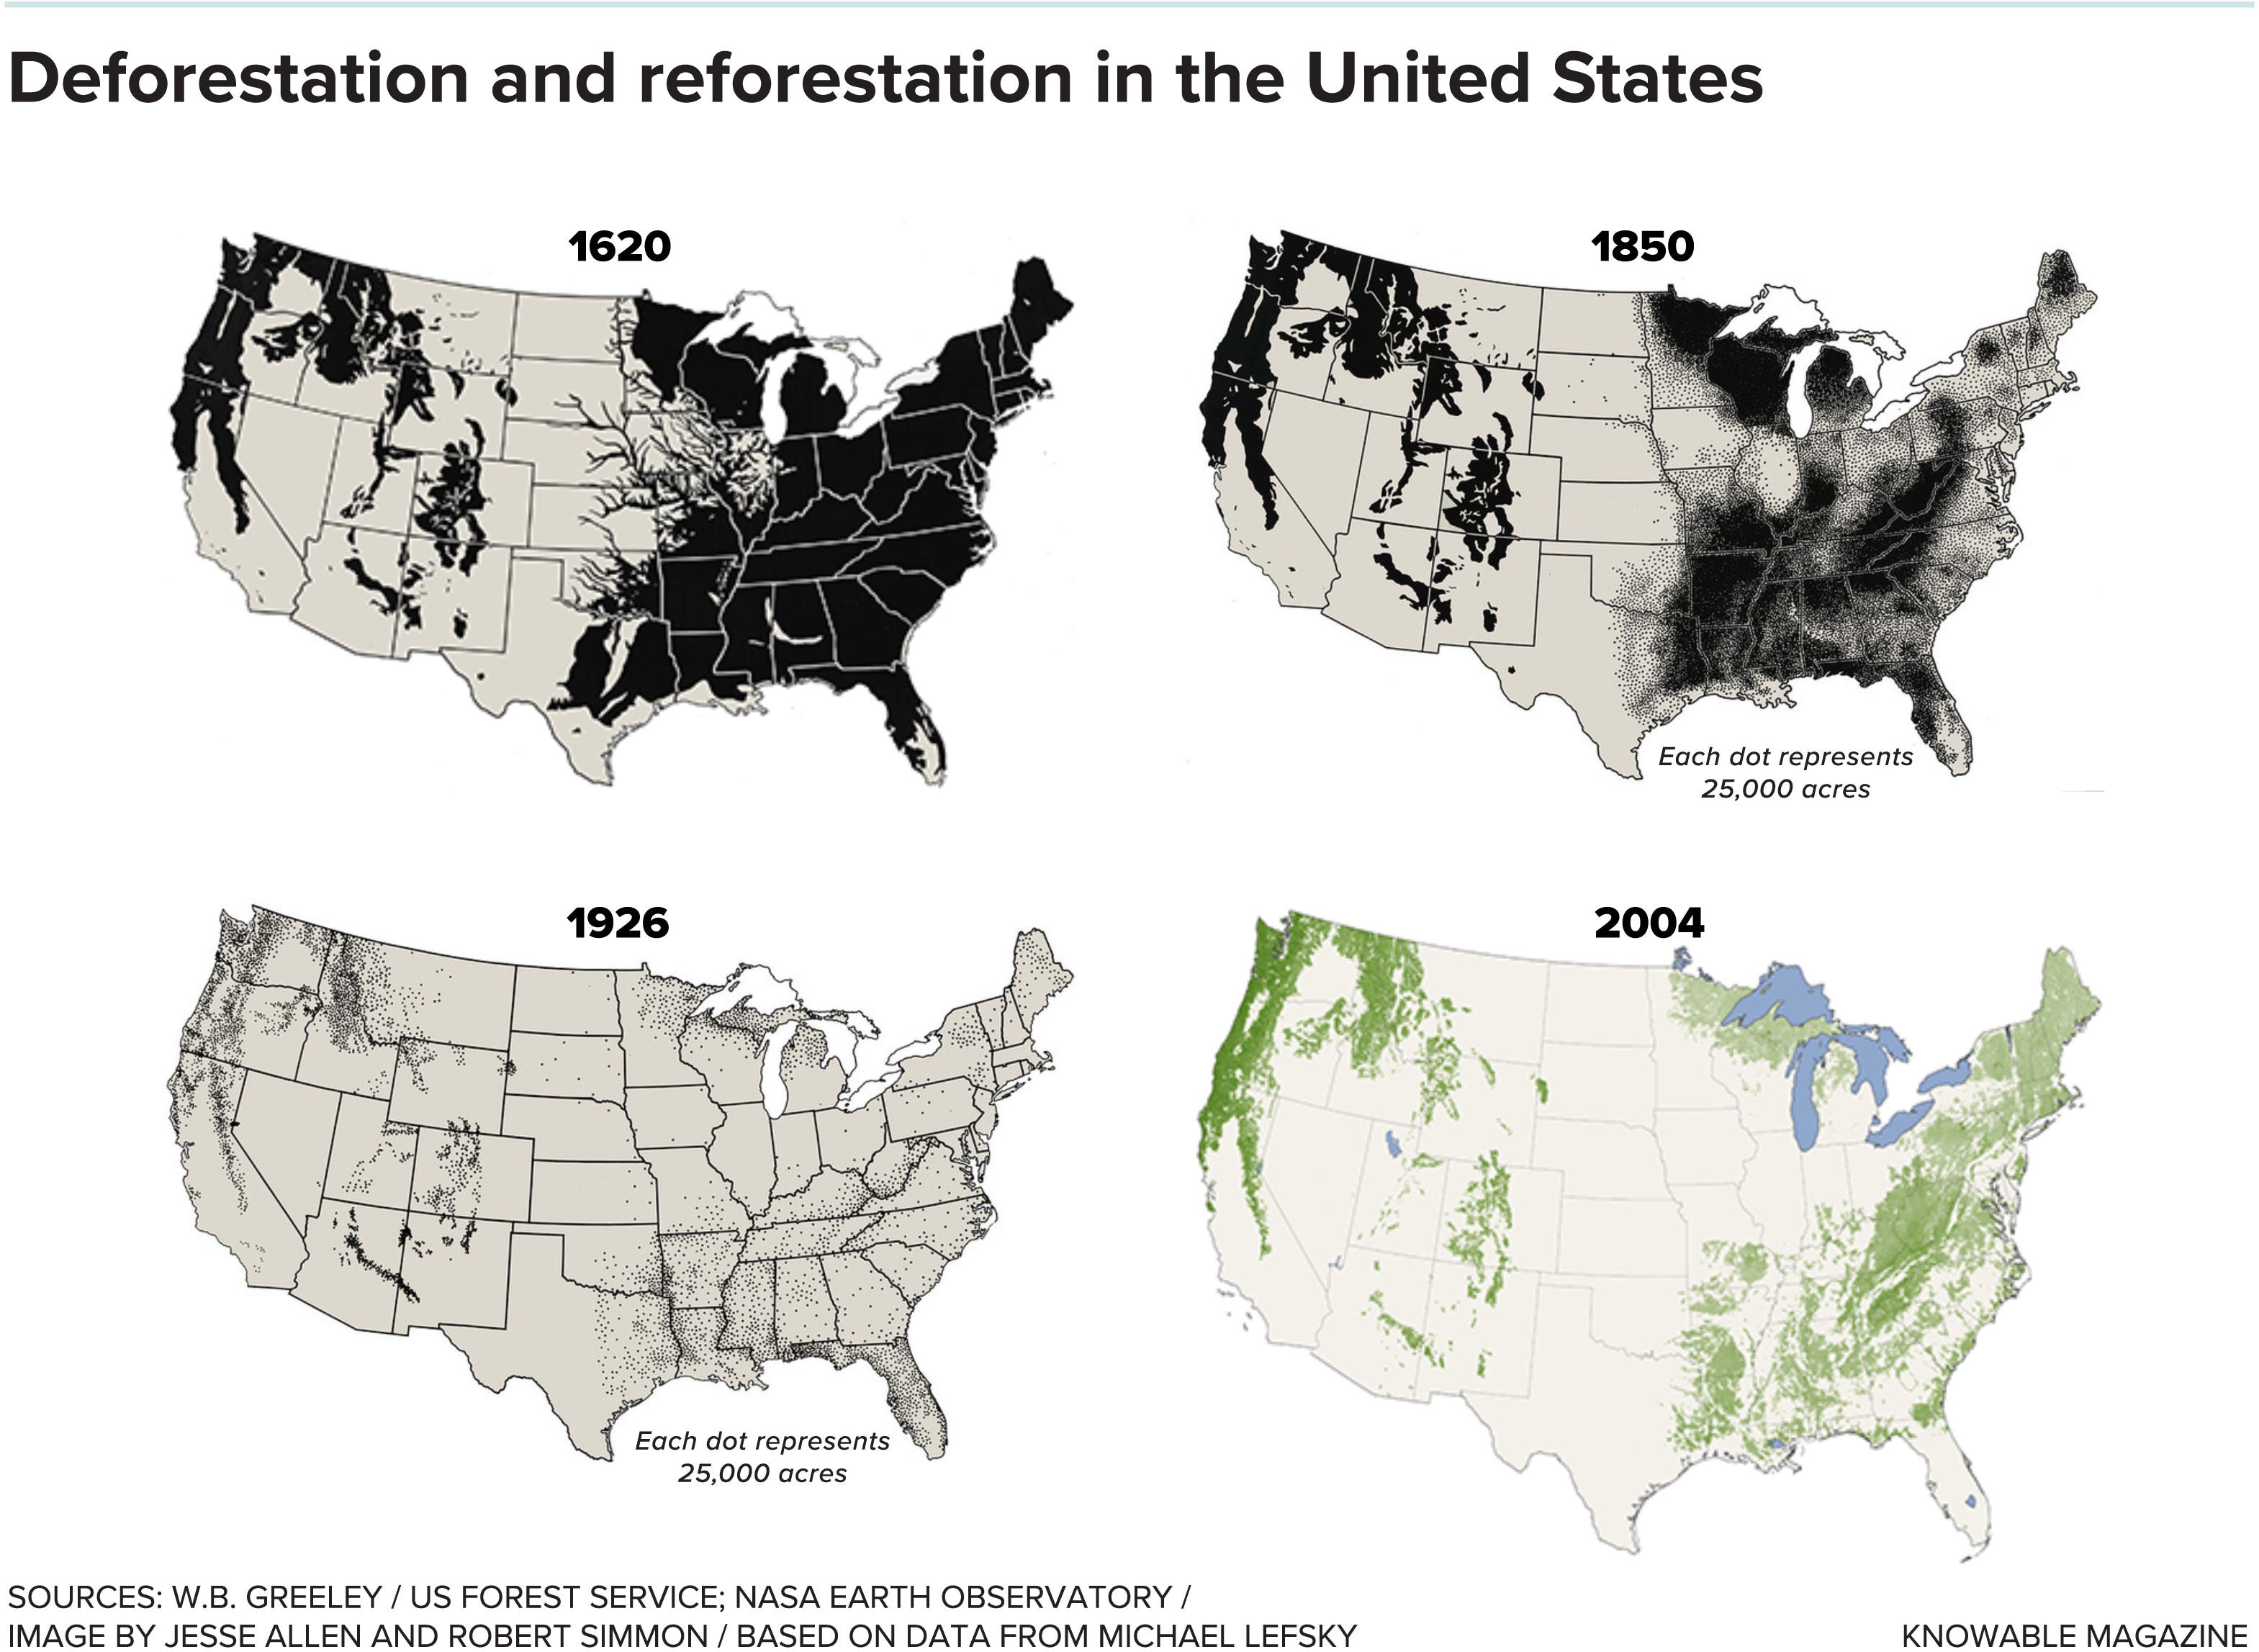 Deforestation and reforestation in the United States.